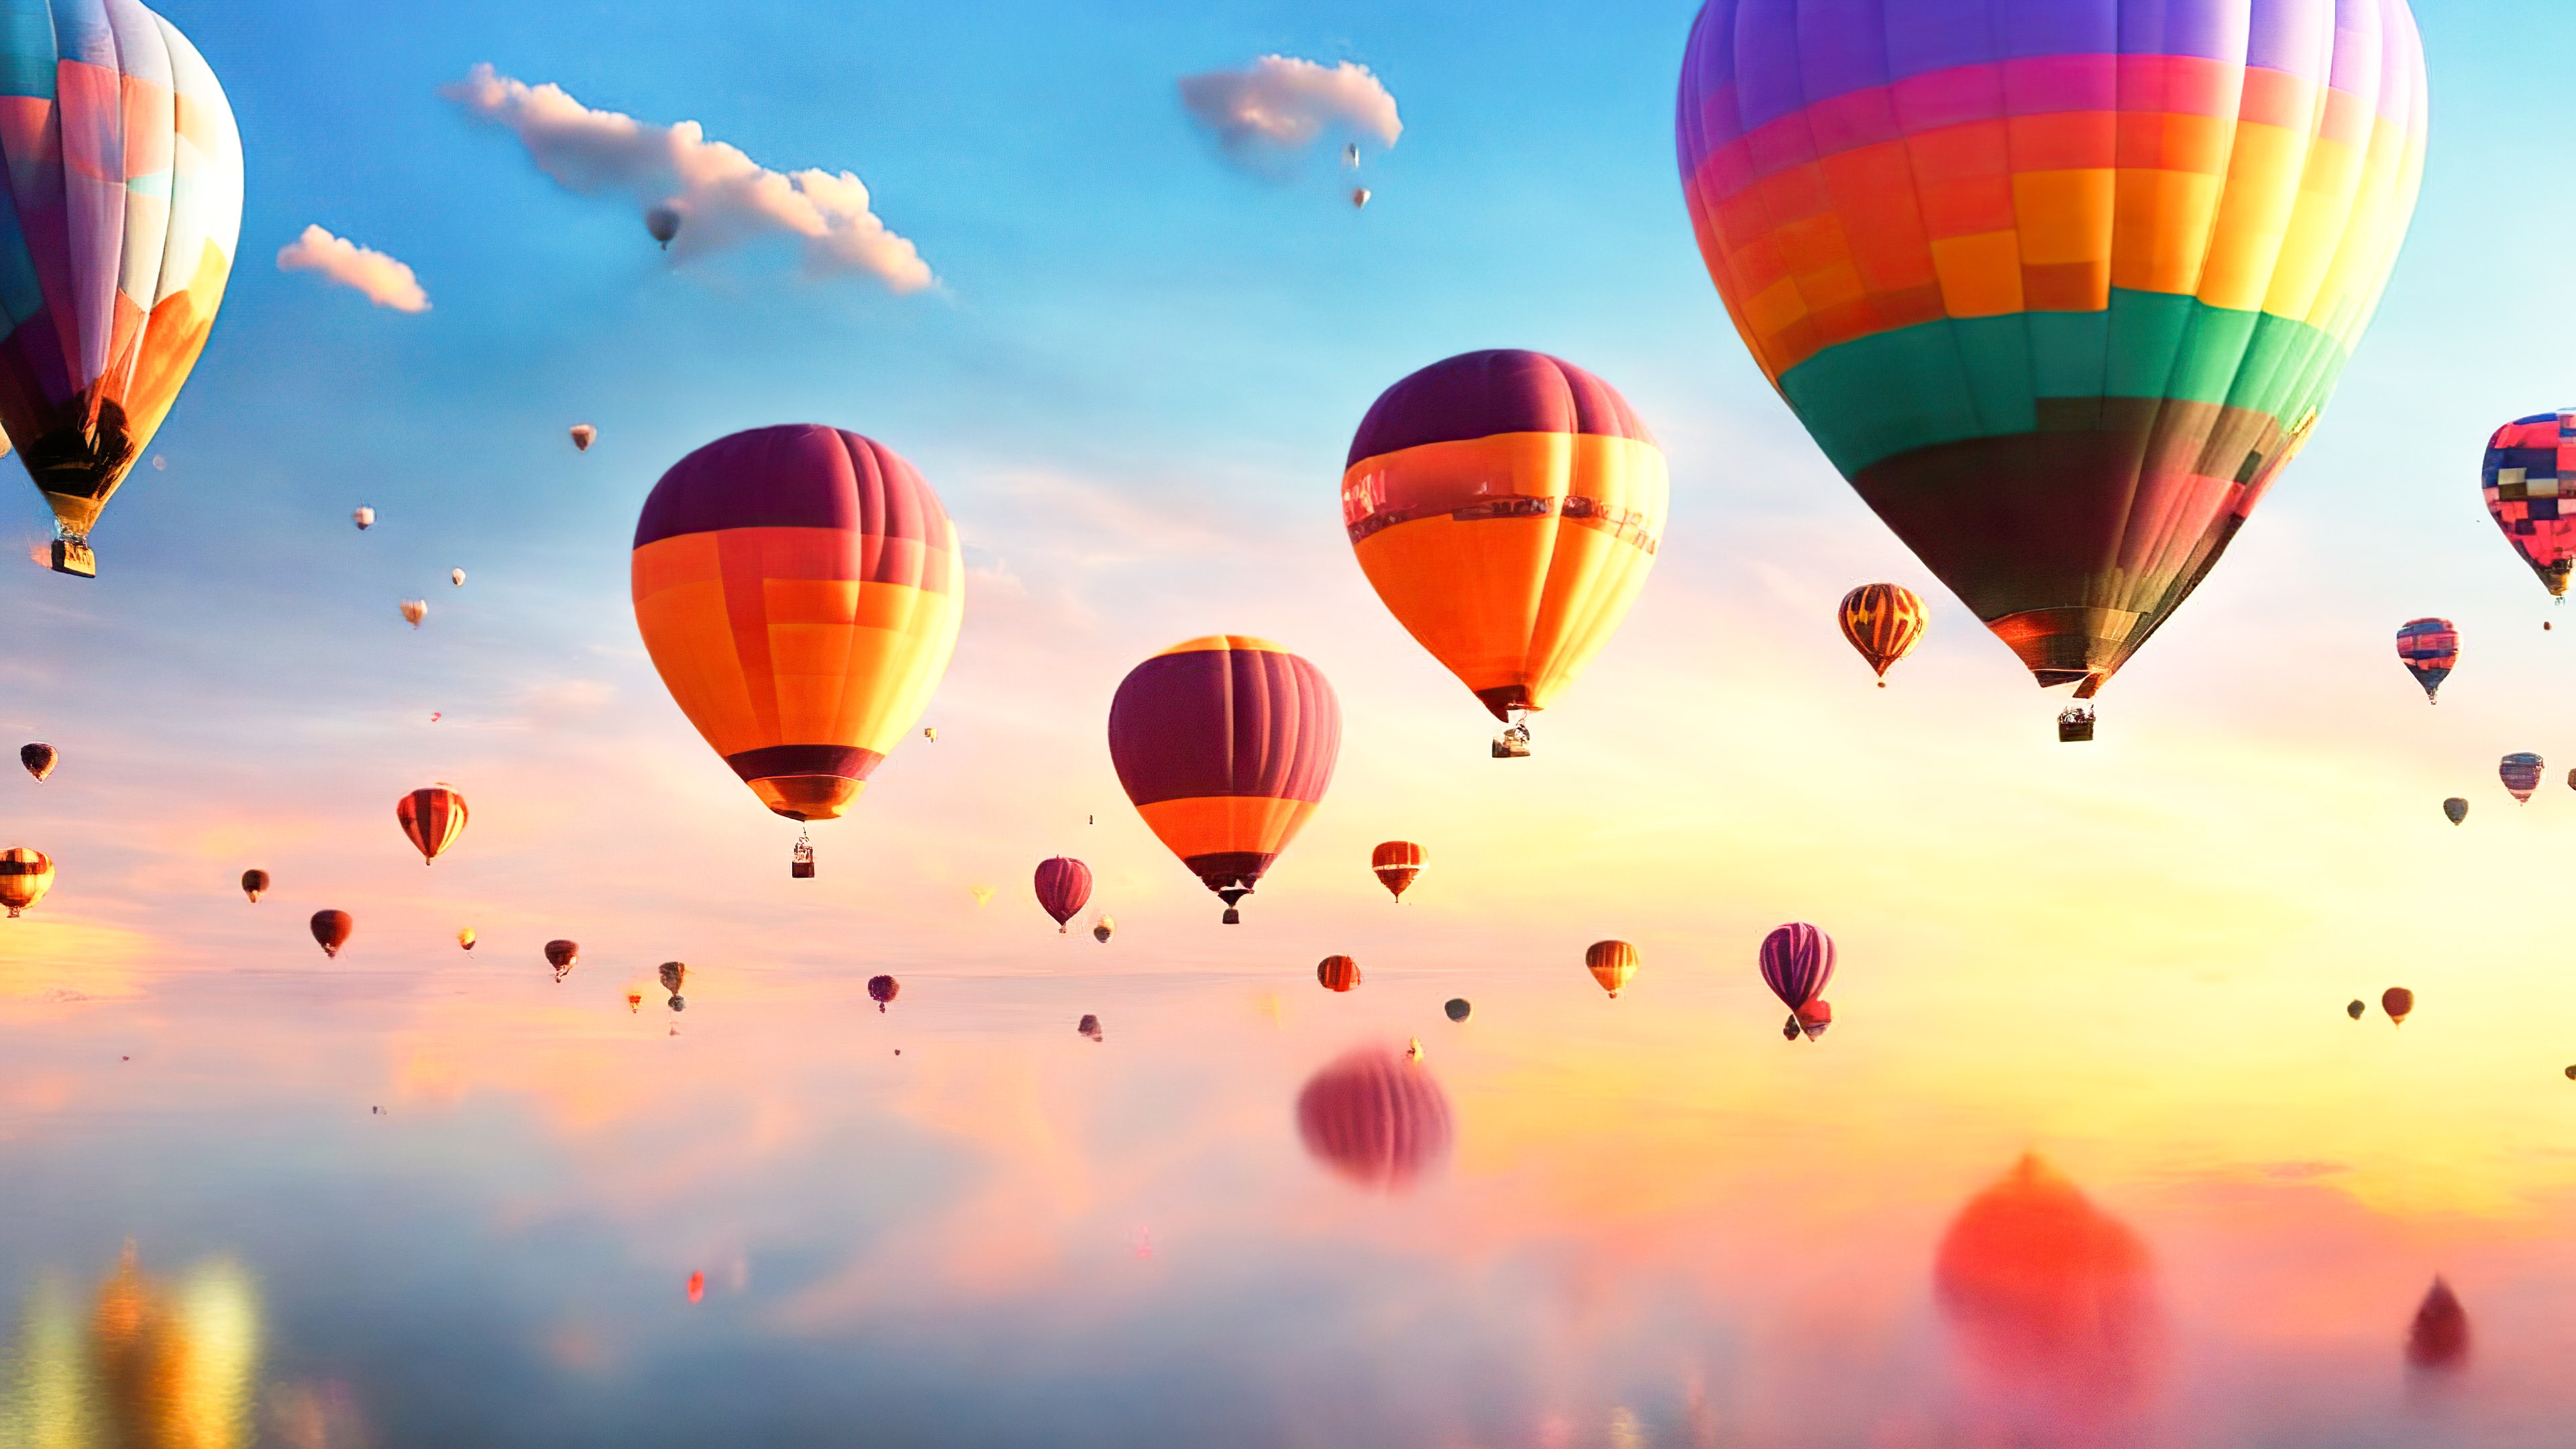 Adorn your screen with a whimsical and dreamy sky filled with floating, colorful hot air balloons at sunrise with our nature wallpaper in ultra HD.